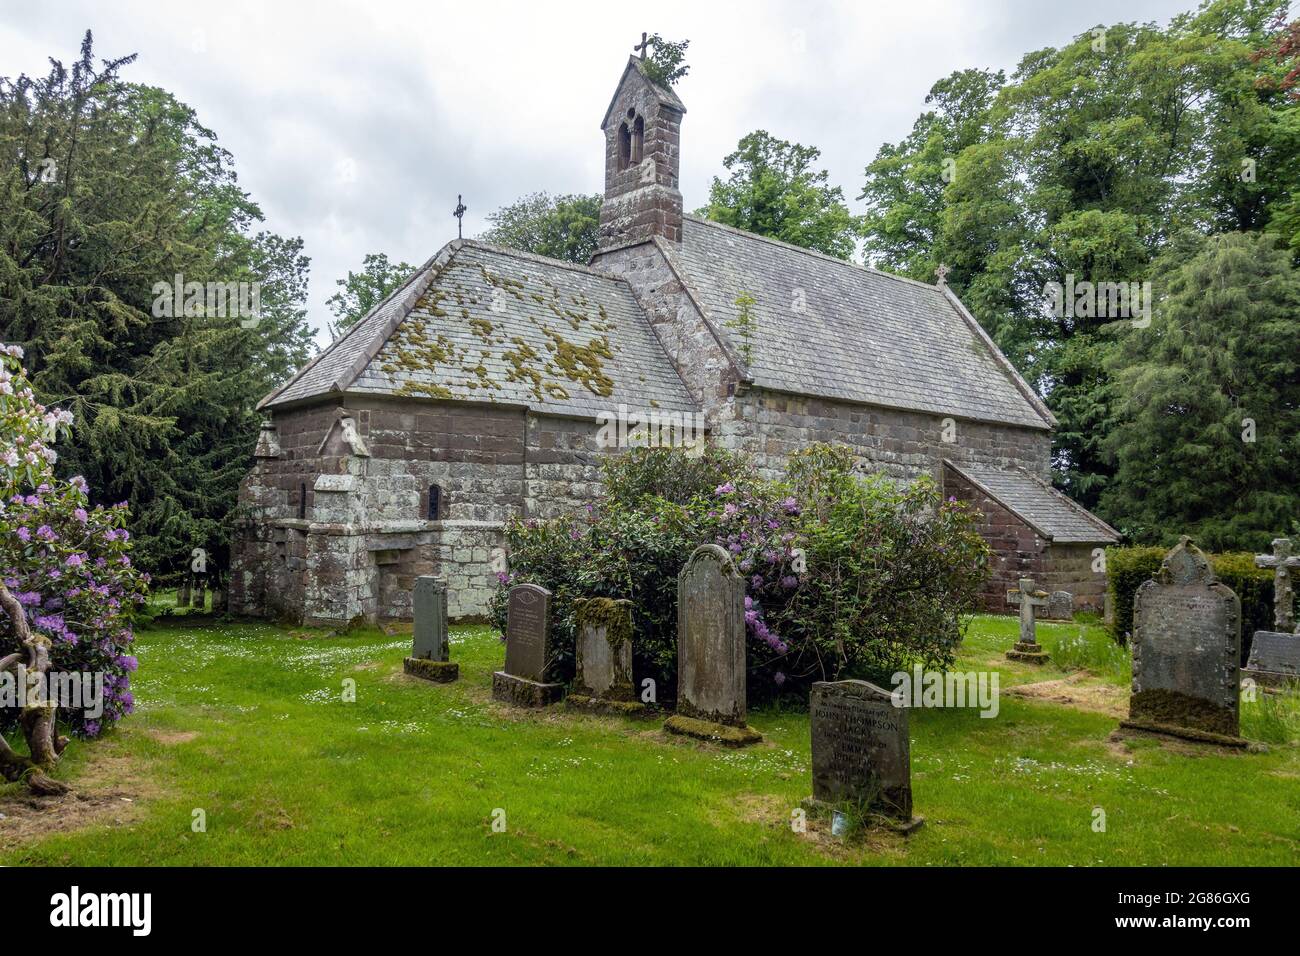 The Holy Trinity Church in Old Bewick, Northumberland, is a secluded 12th-century church standing in isolation at the end of a single-track road. Stock Photo